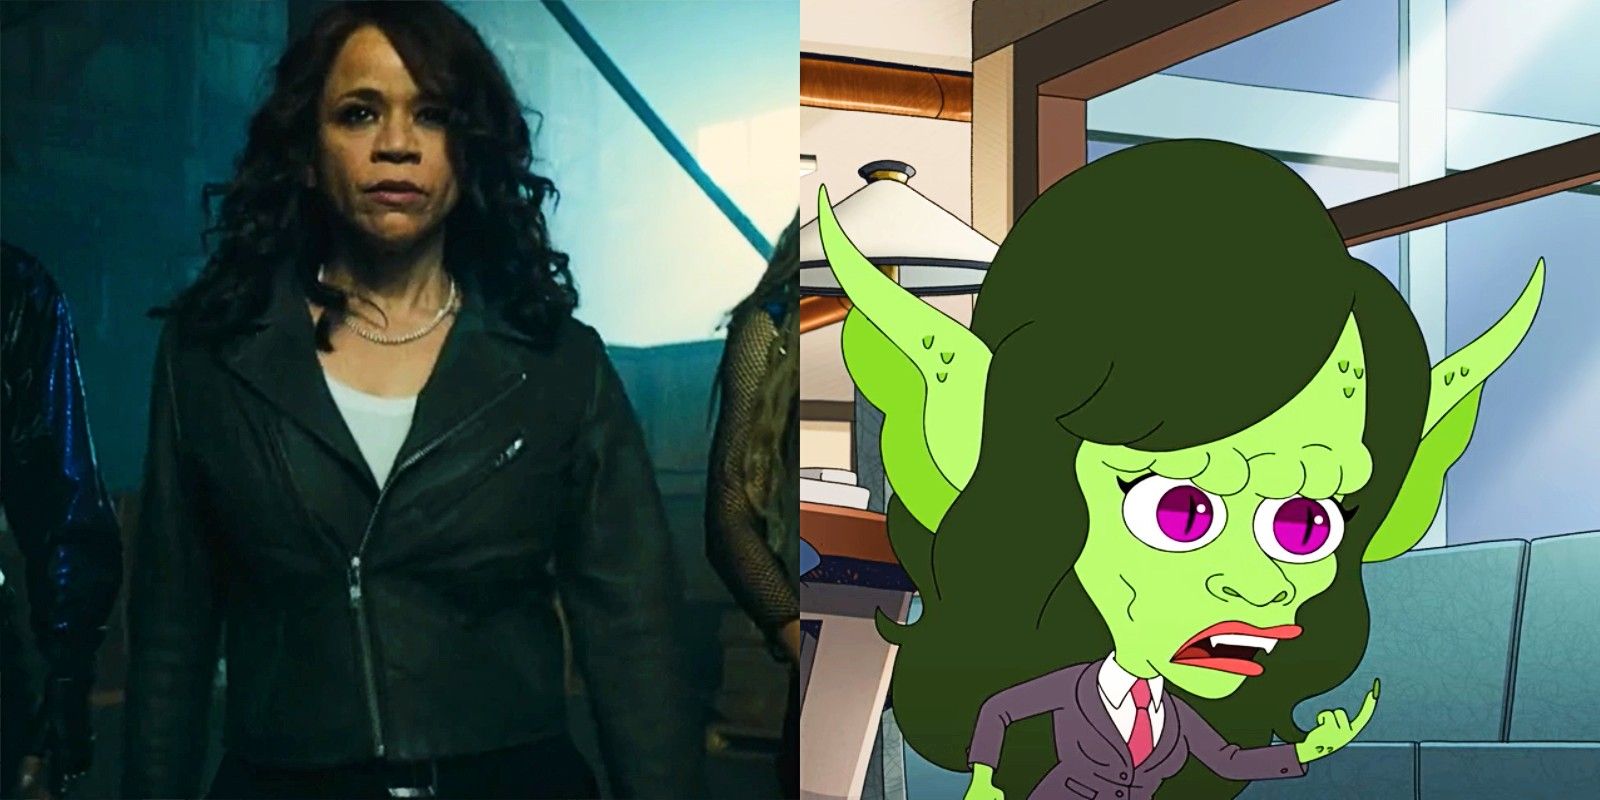 Rosie Perez As Petra the Ambition Gremlin